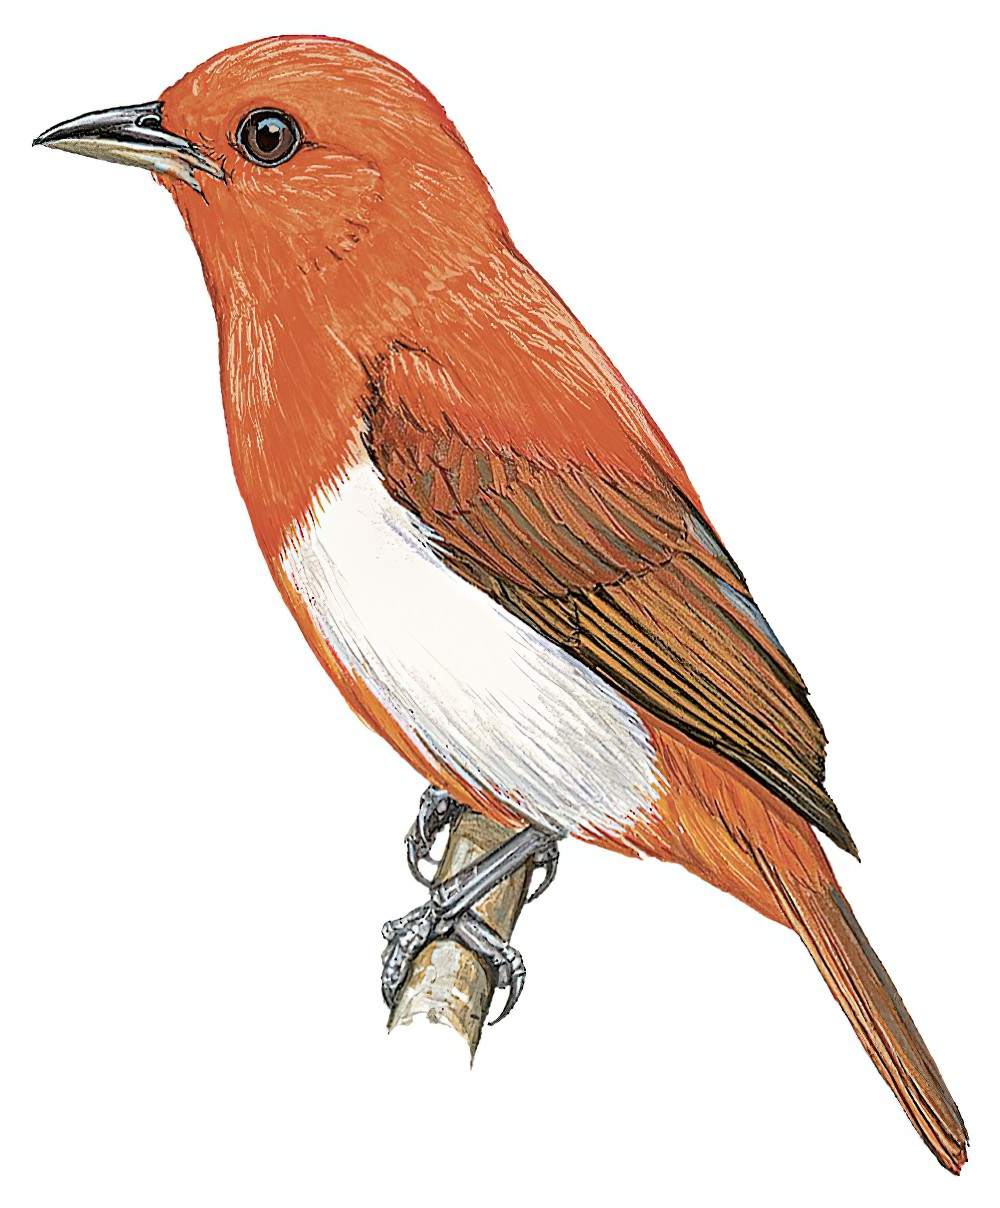 Scarlet-and-white Tanager / Chrysothlypis salmoni